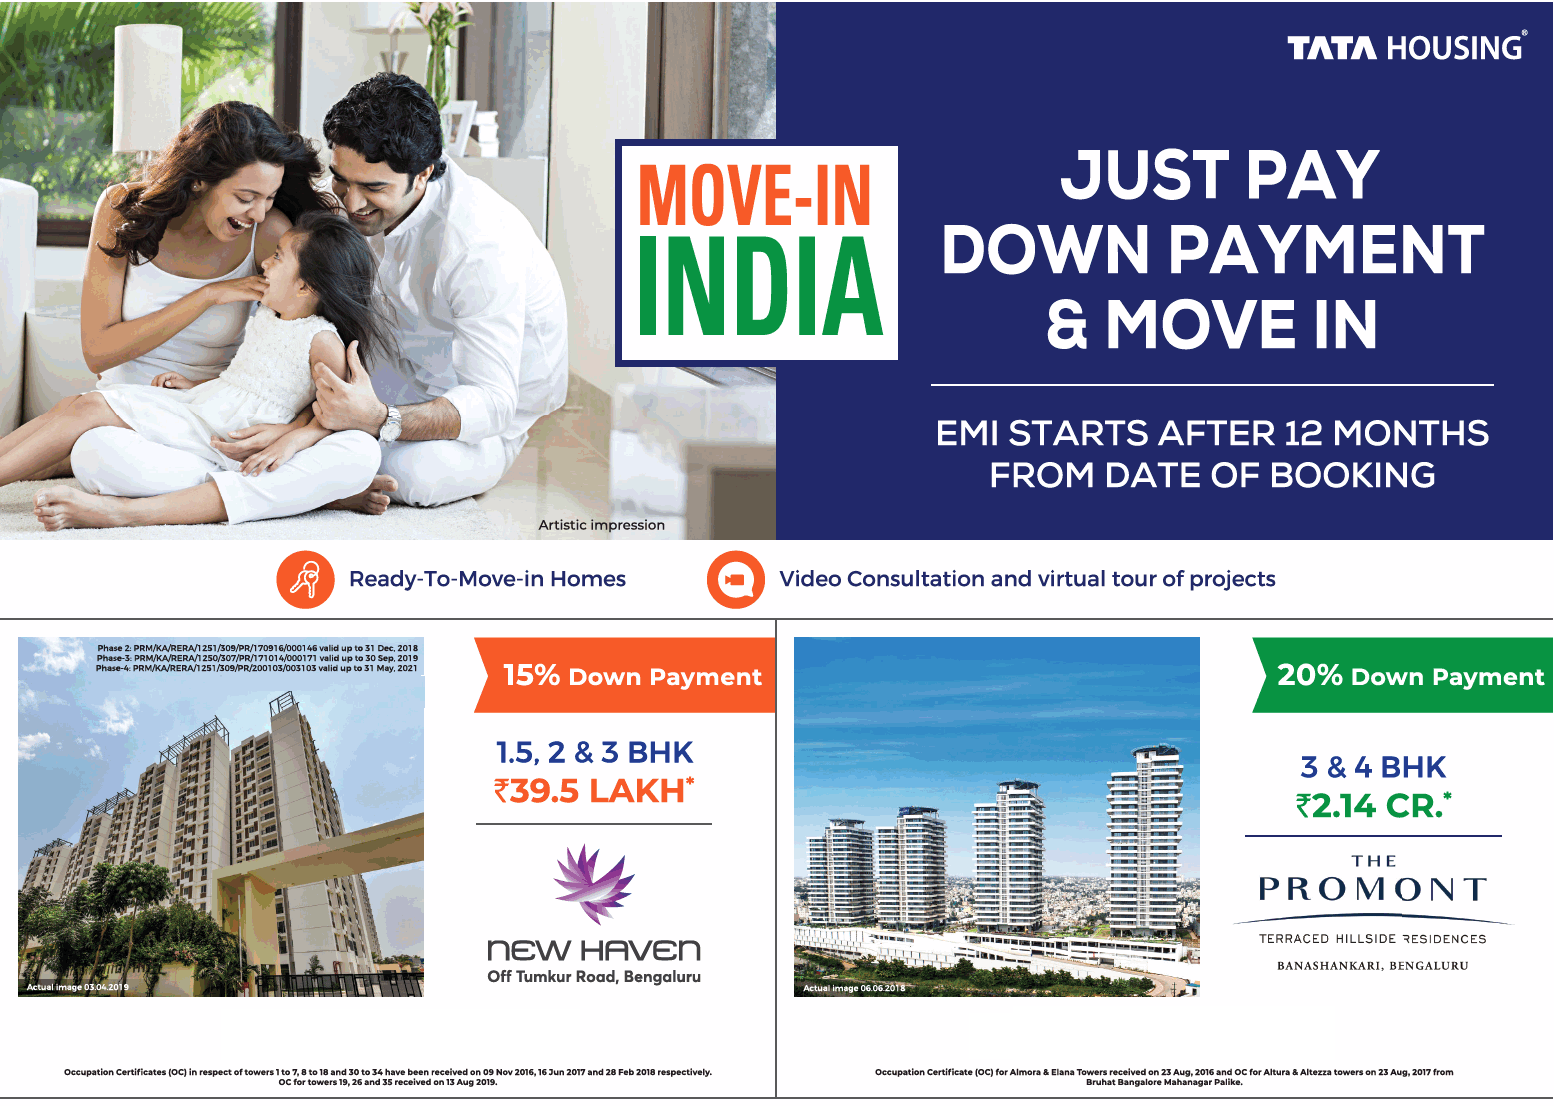 Just pay down payment and move in at Tata New Haven and Tata The Promont in Bangalore